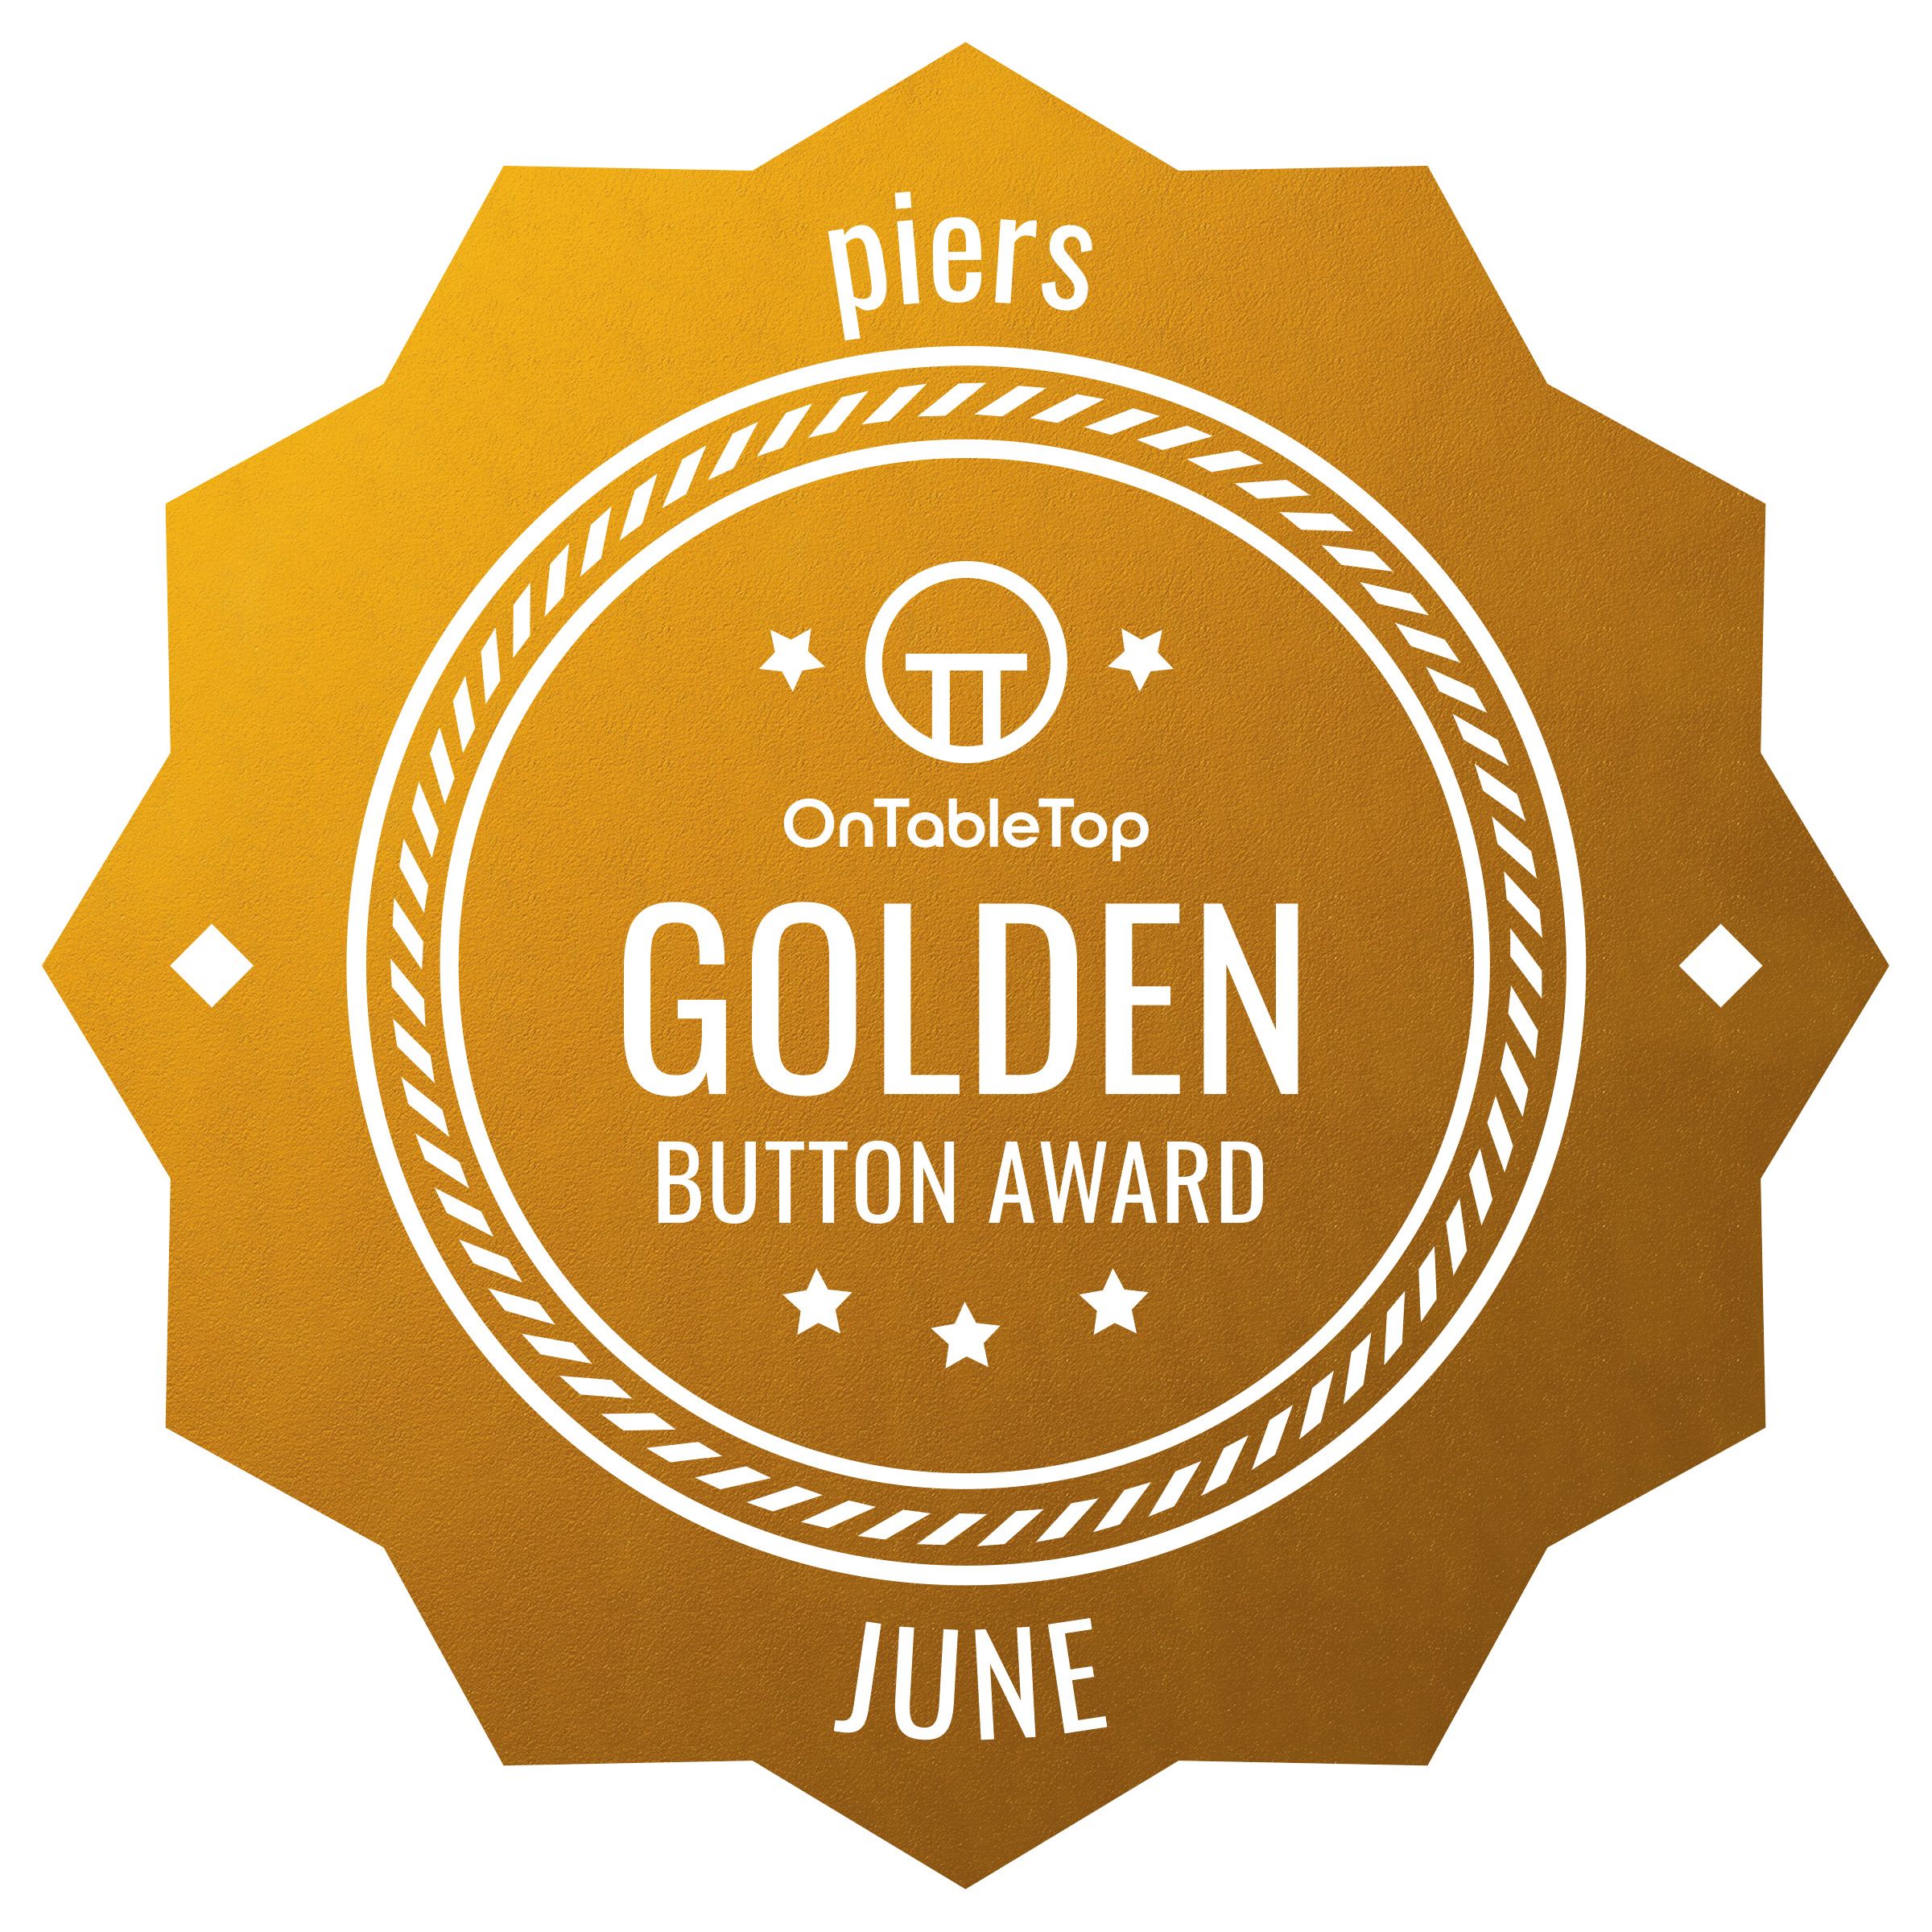 piers-gold-button